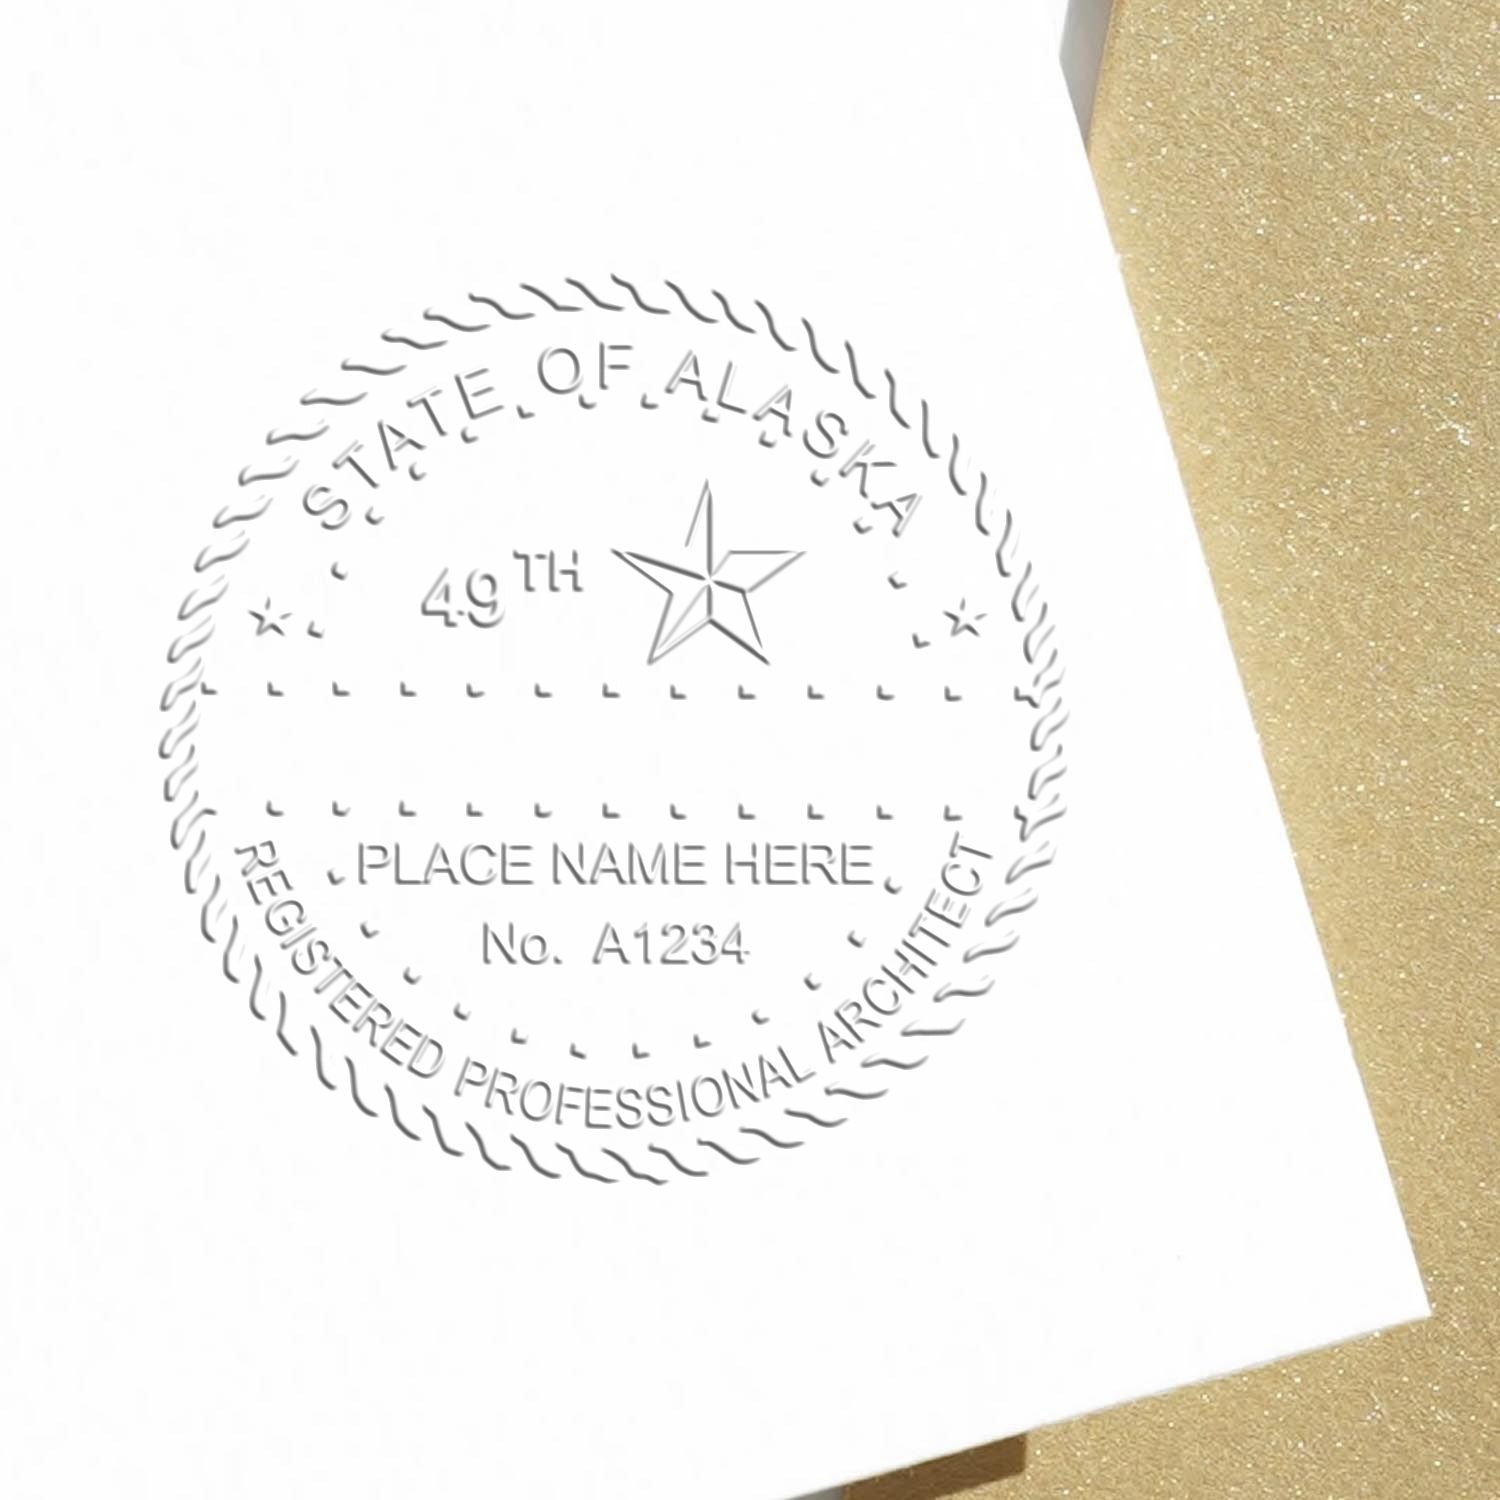 The main image for the Alaska Desk Architect Embossing Seal depicting a sample of the imprint and electronic files